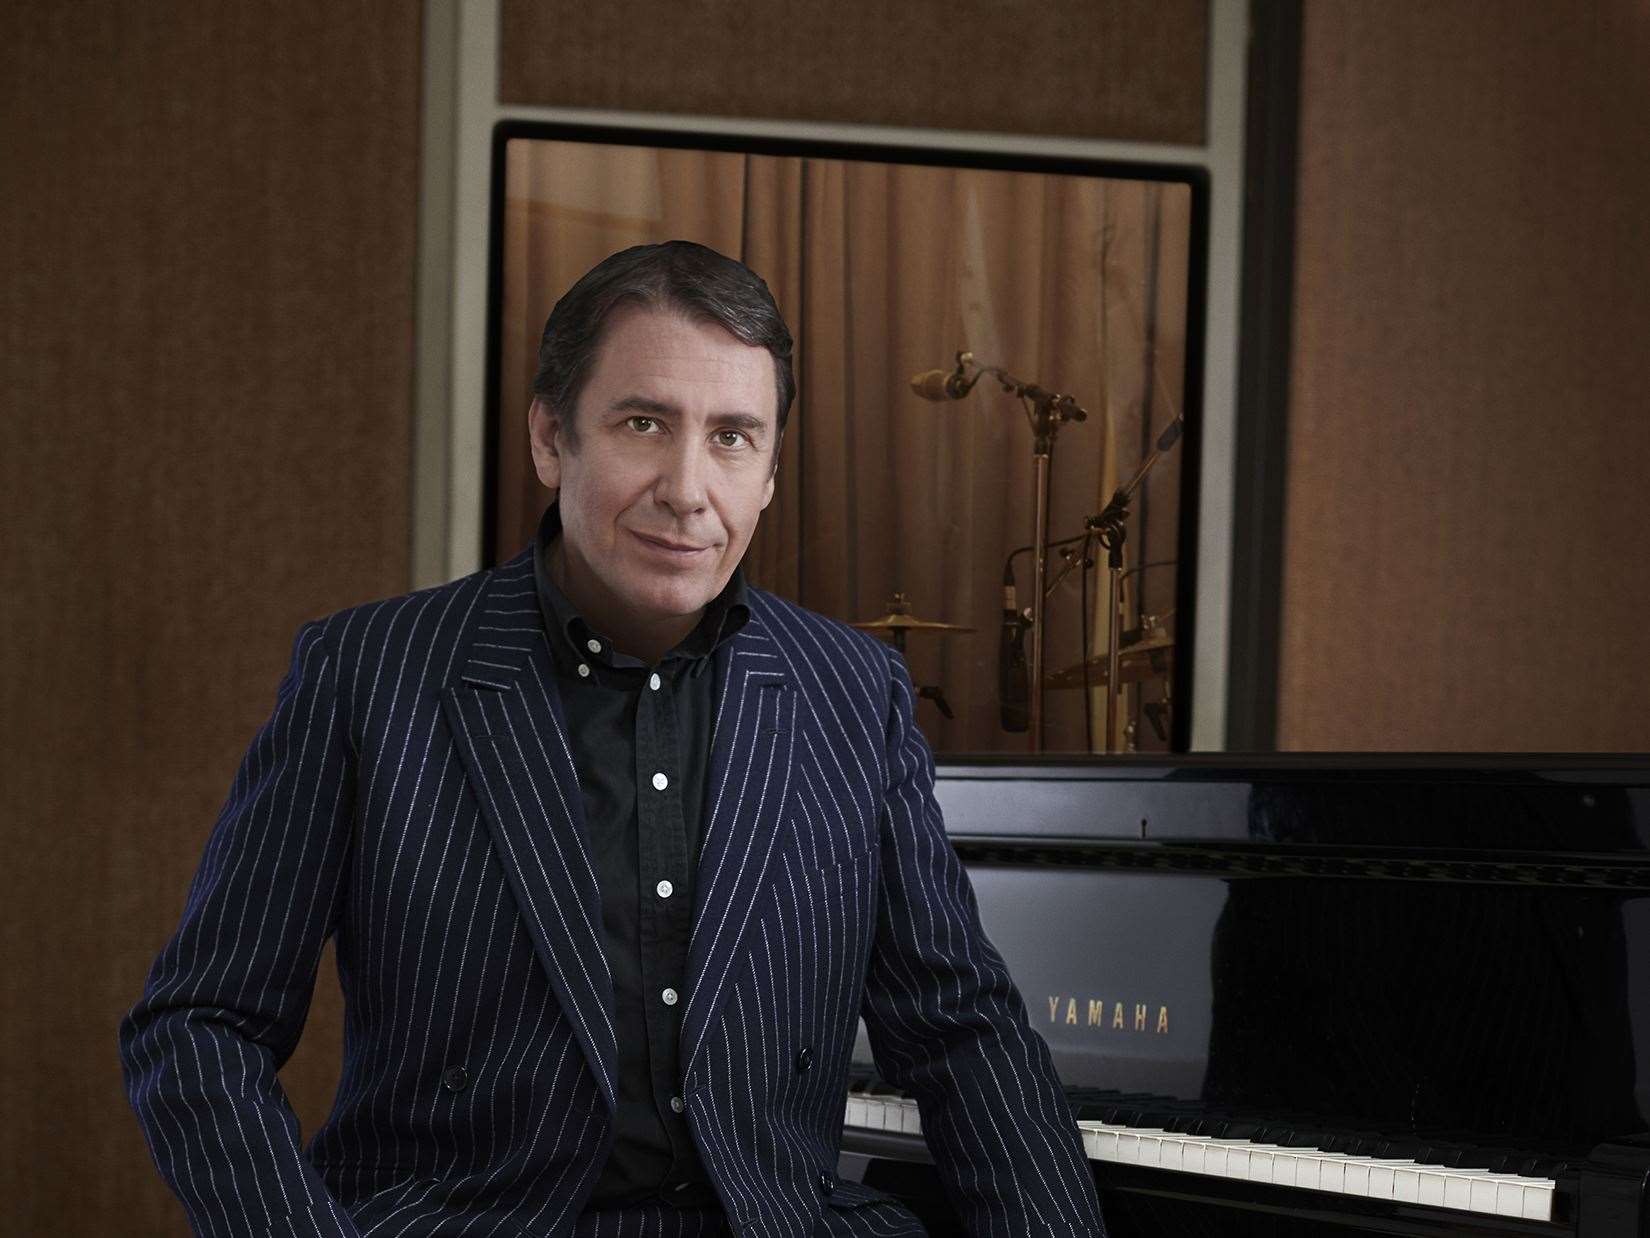 Jools could provide Medway's national anthem